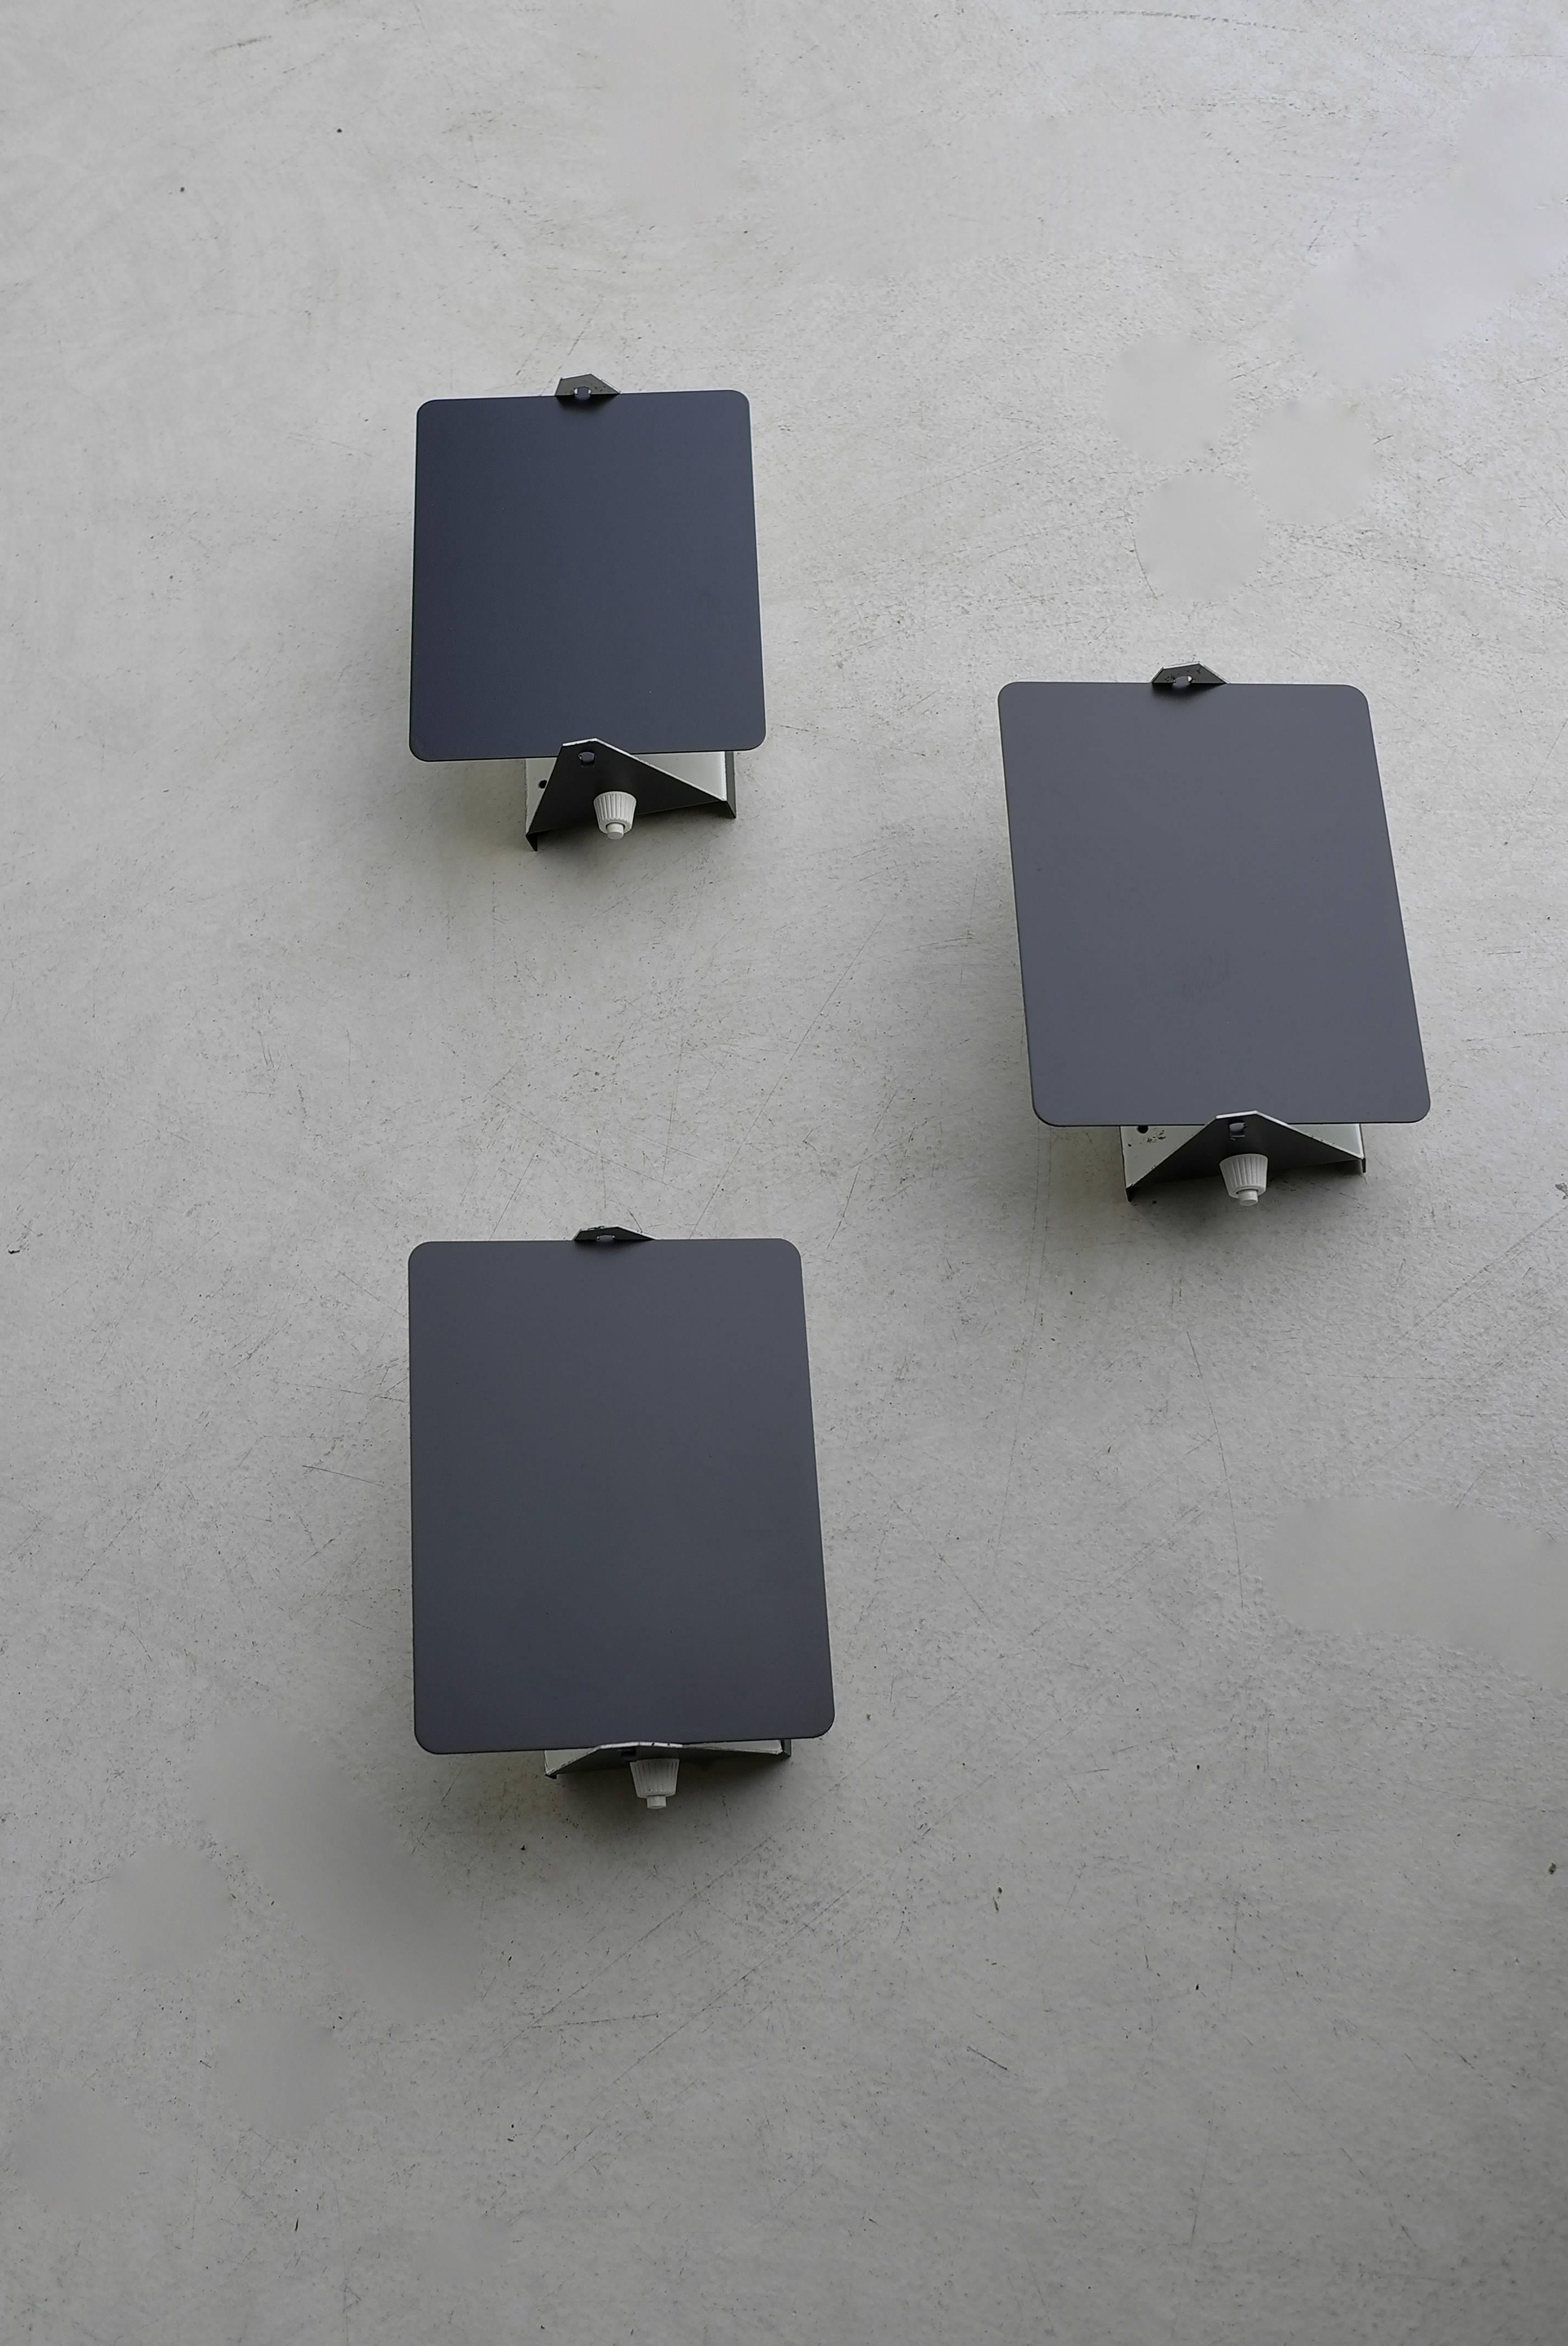 Black and white enameled pivoting wall lights by Charlotte Perriand for Les Arcs Ski Resort. Lamps can be arranged in many configurations to accommodate all living environments.